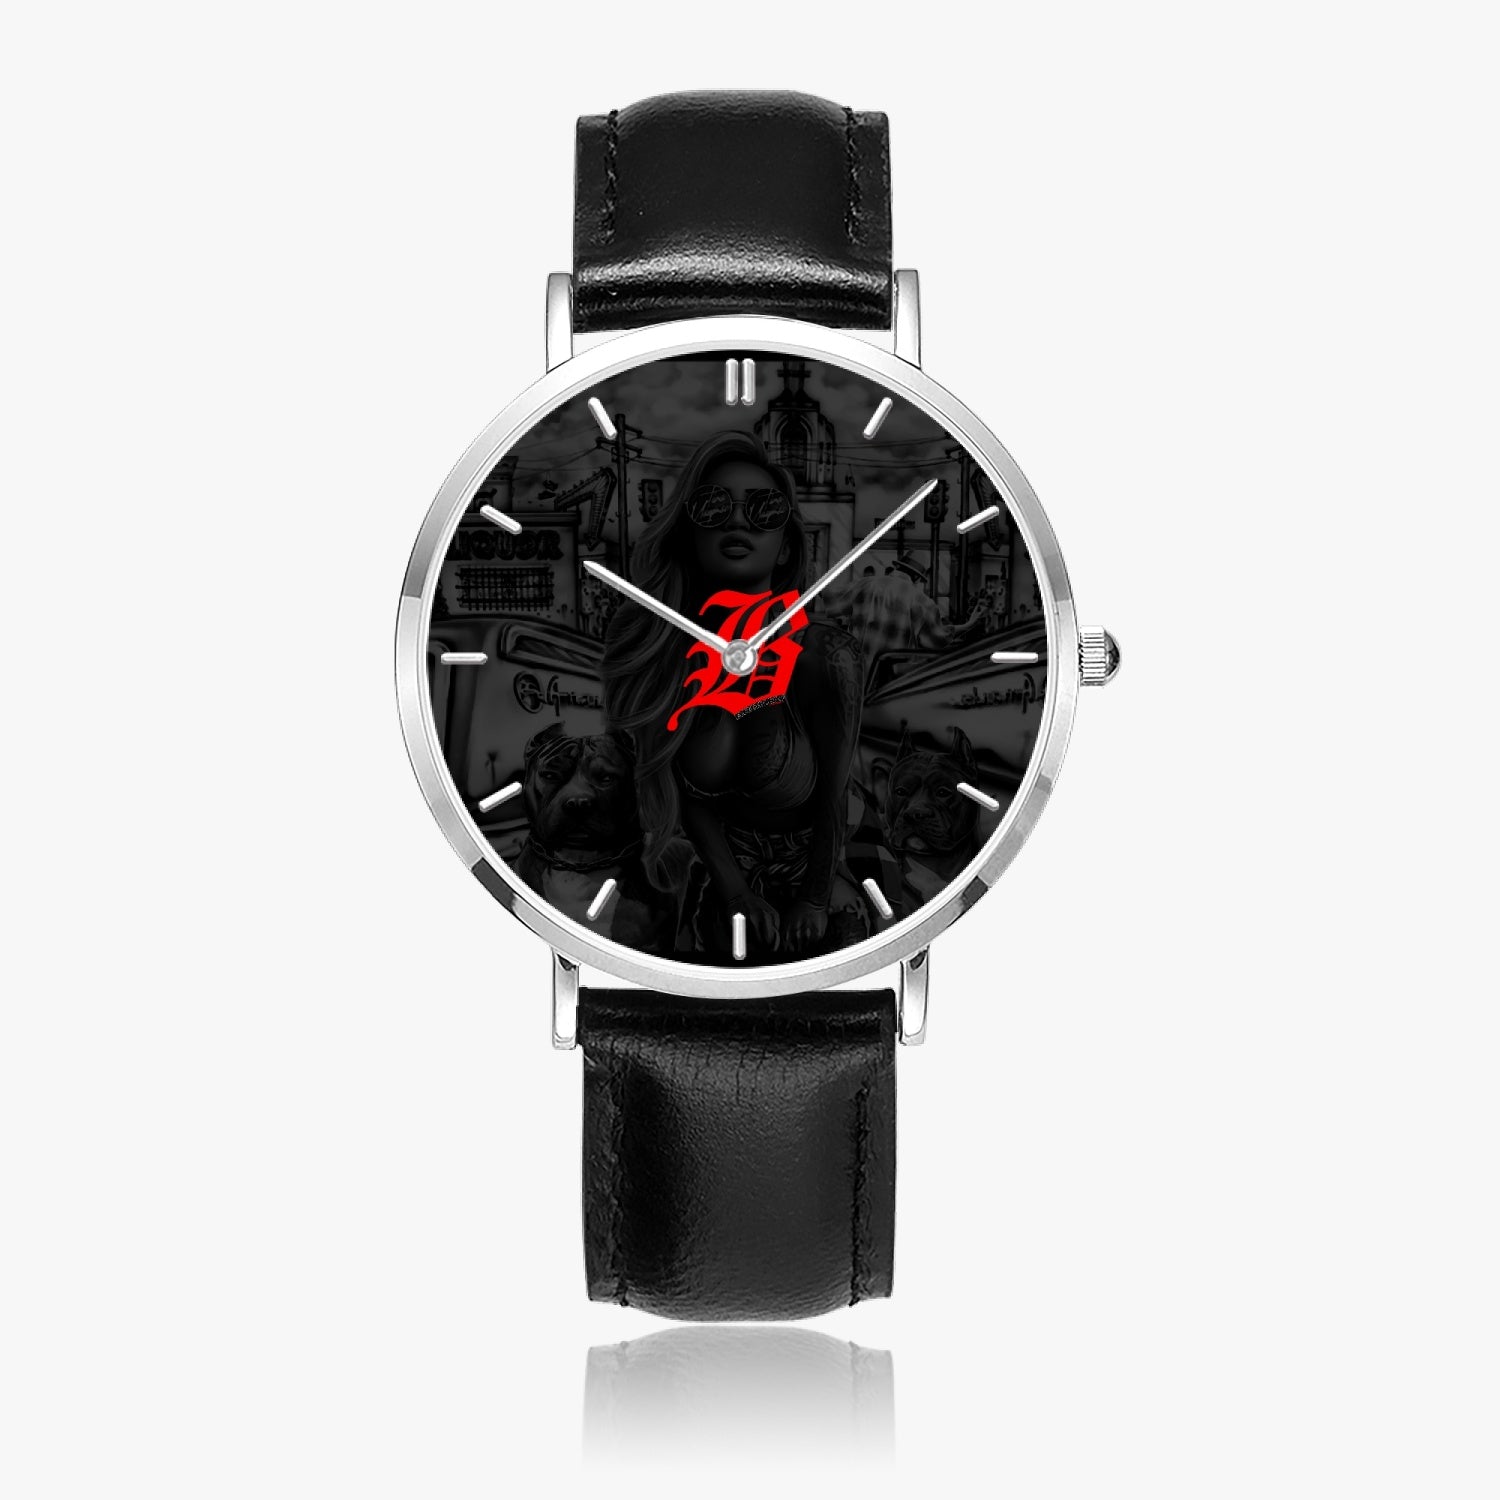 165. Hot Selling Ultra-Thin Leather Strap Quartz Watch (Silver With Indicators) - GHETTO LOVE